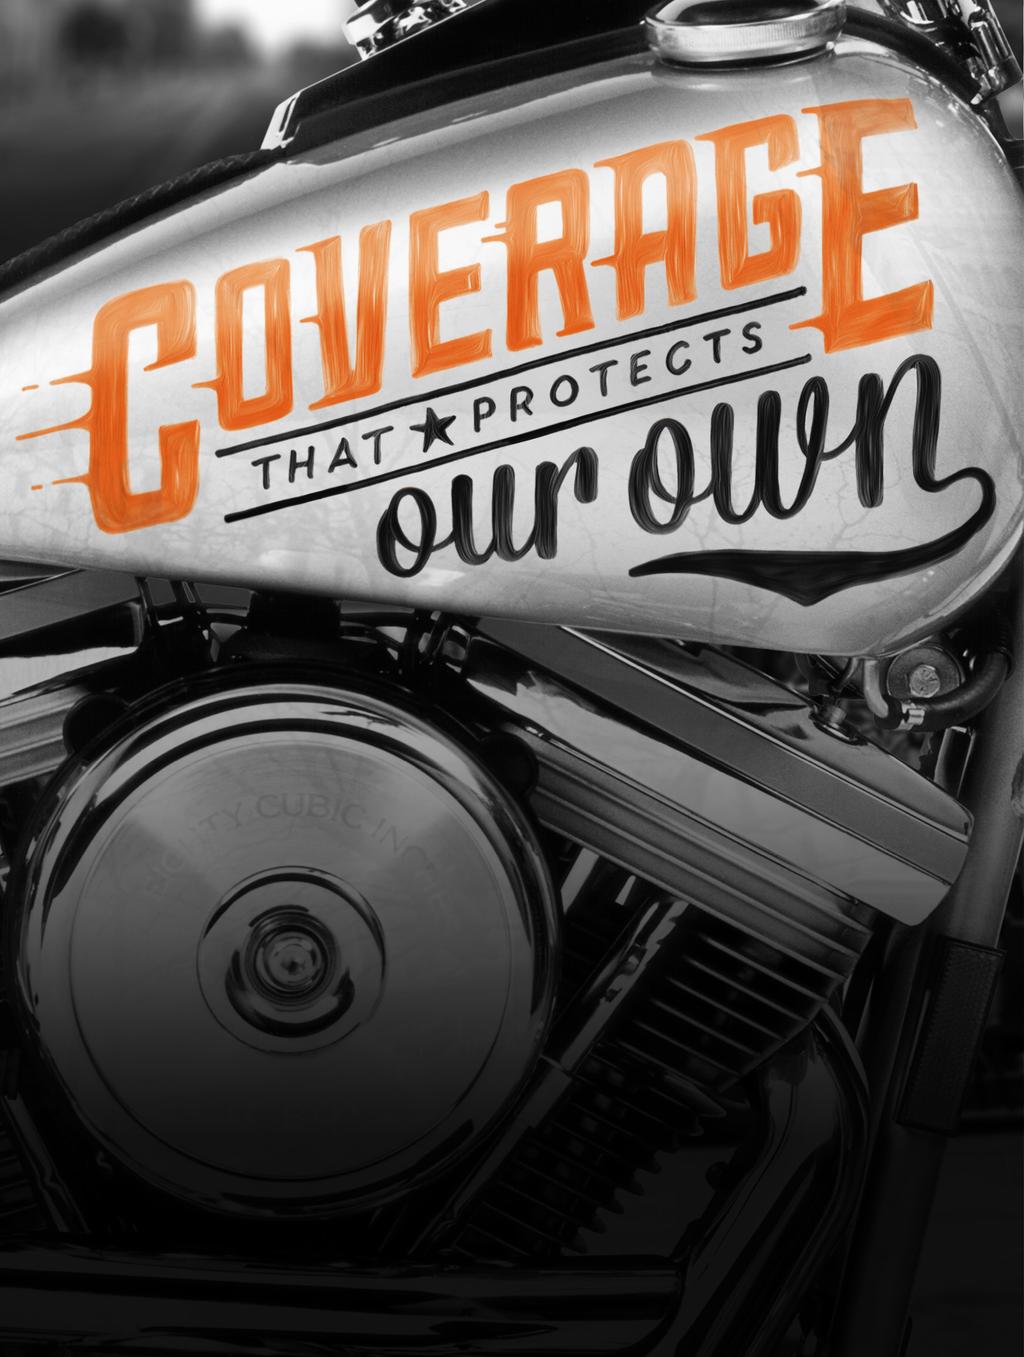 When it comes to protection, the company that built your ride probably knows the perfect way to protect it too.